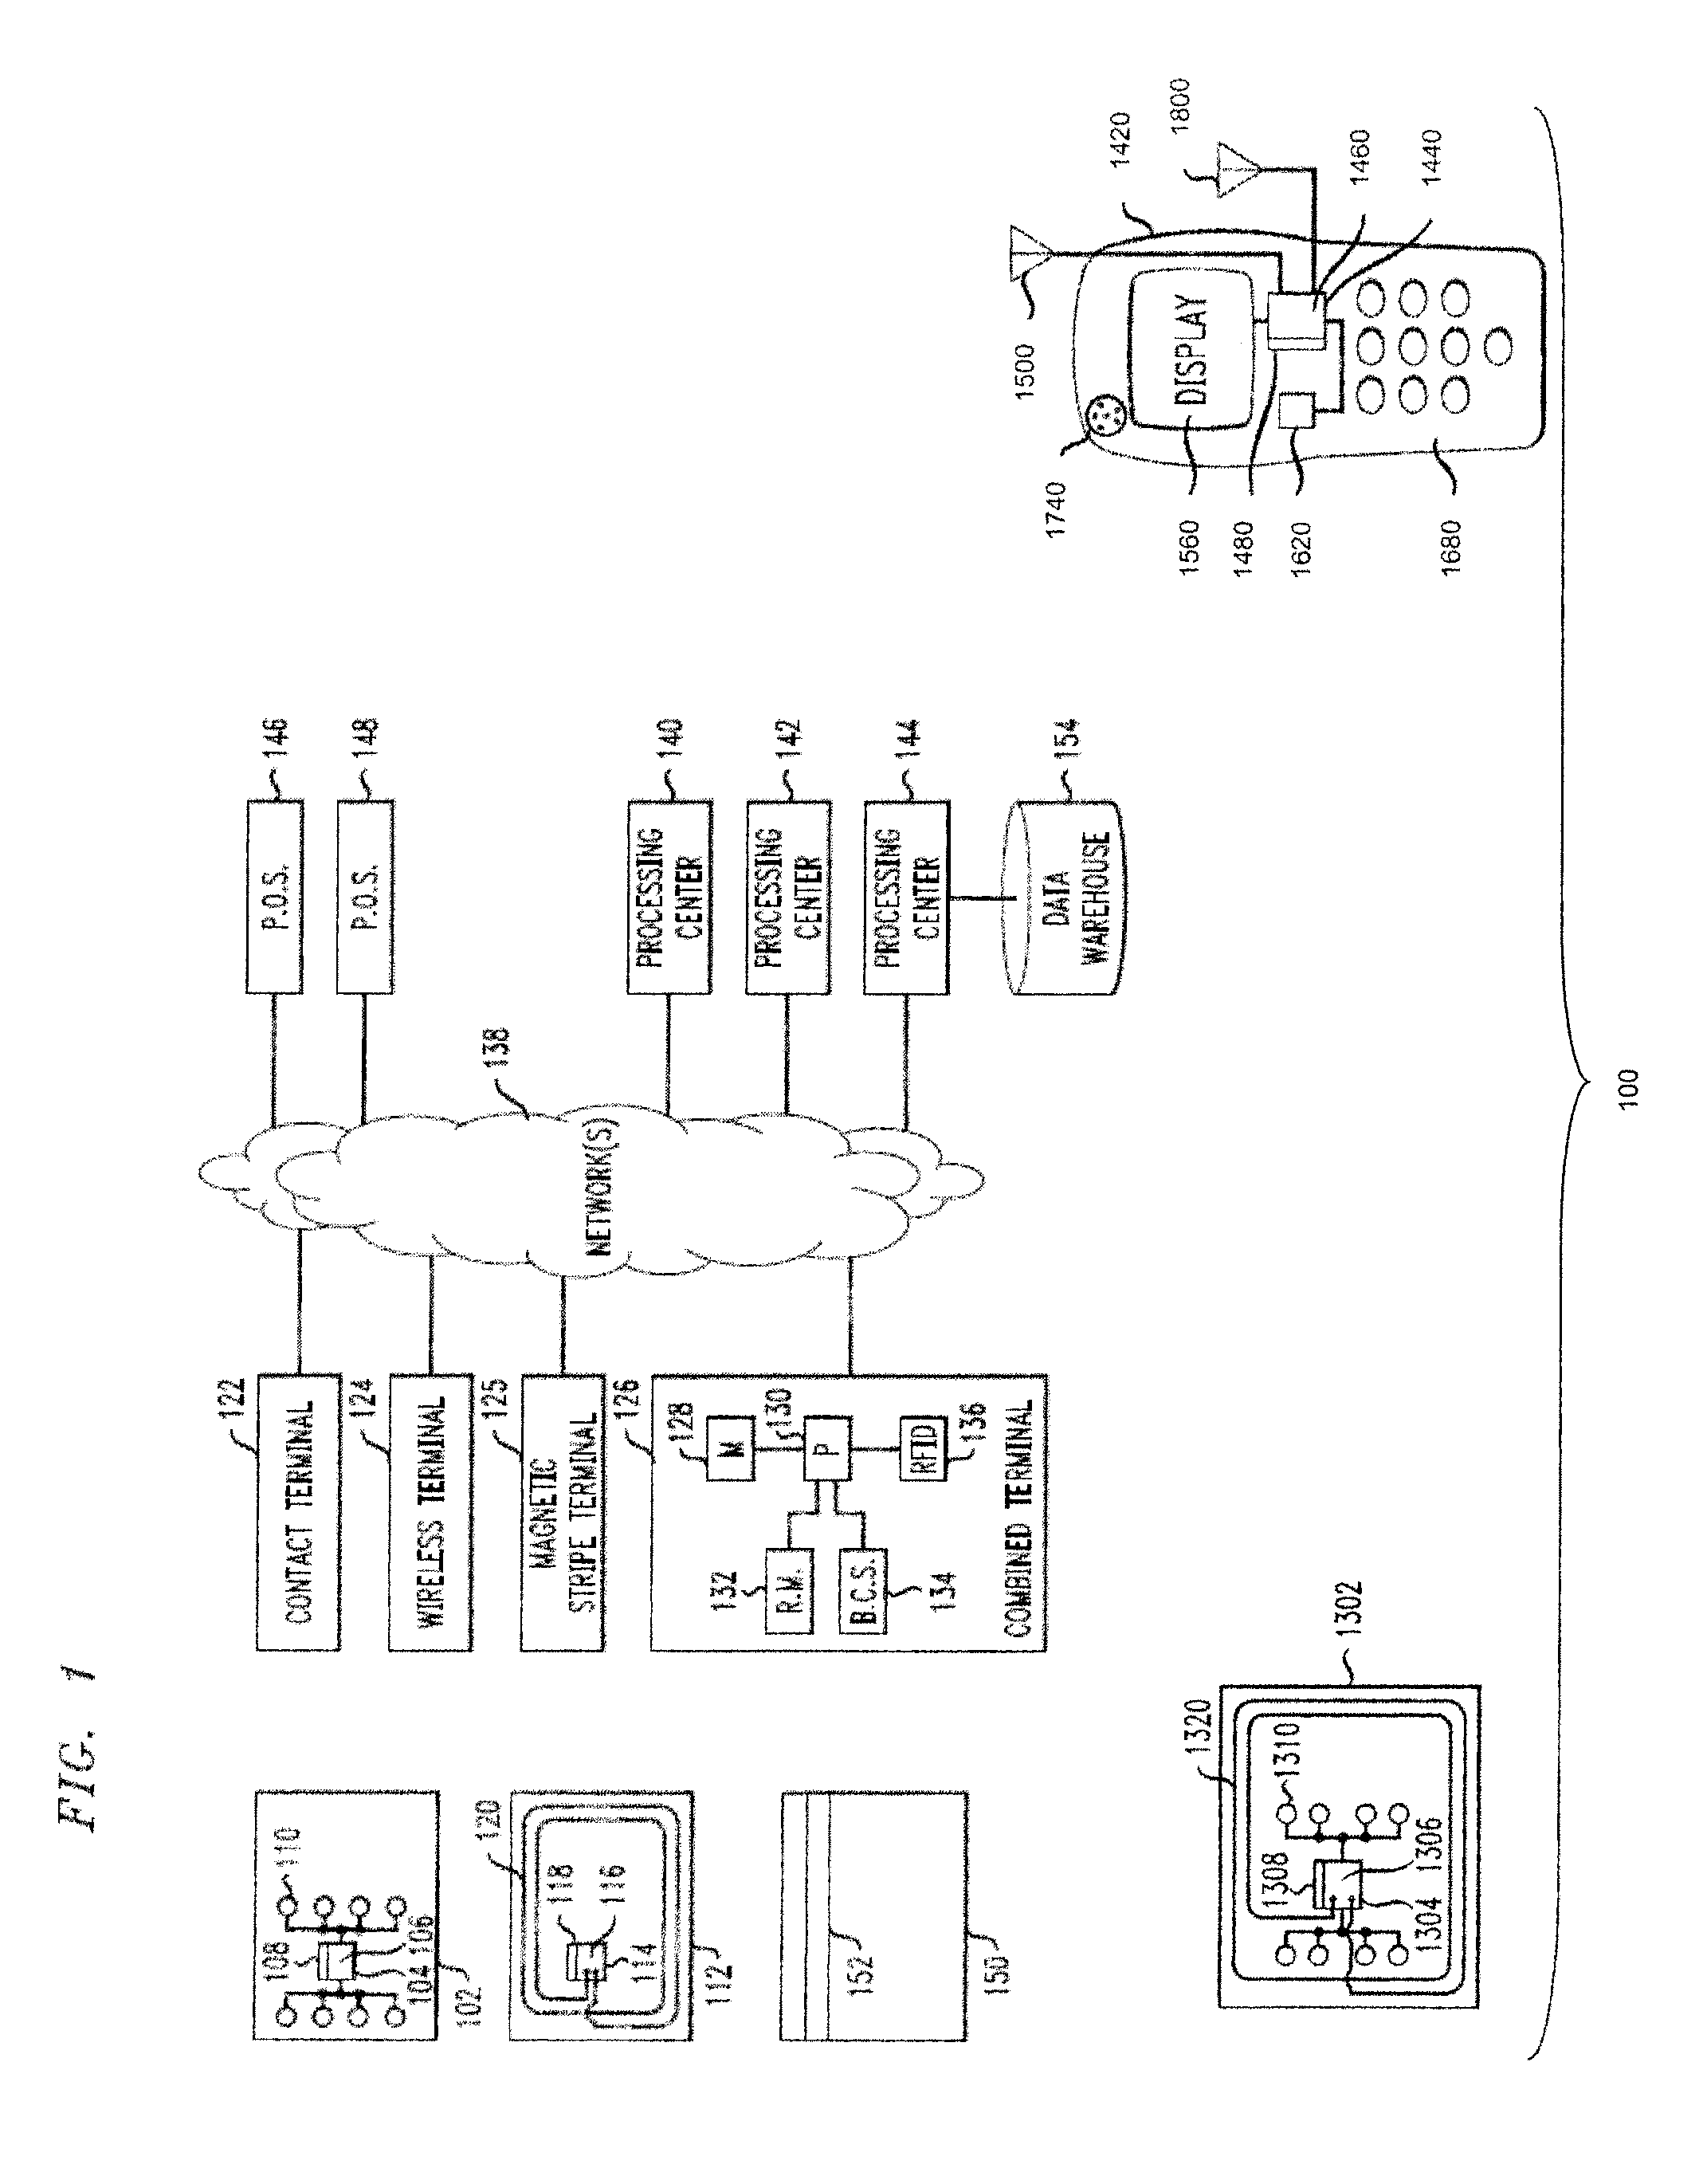 Apparatus and Method for Dynamic Offline Balance Management for Preauthorized Smart Cards